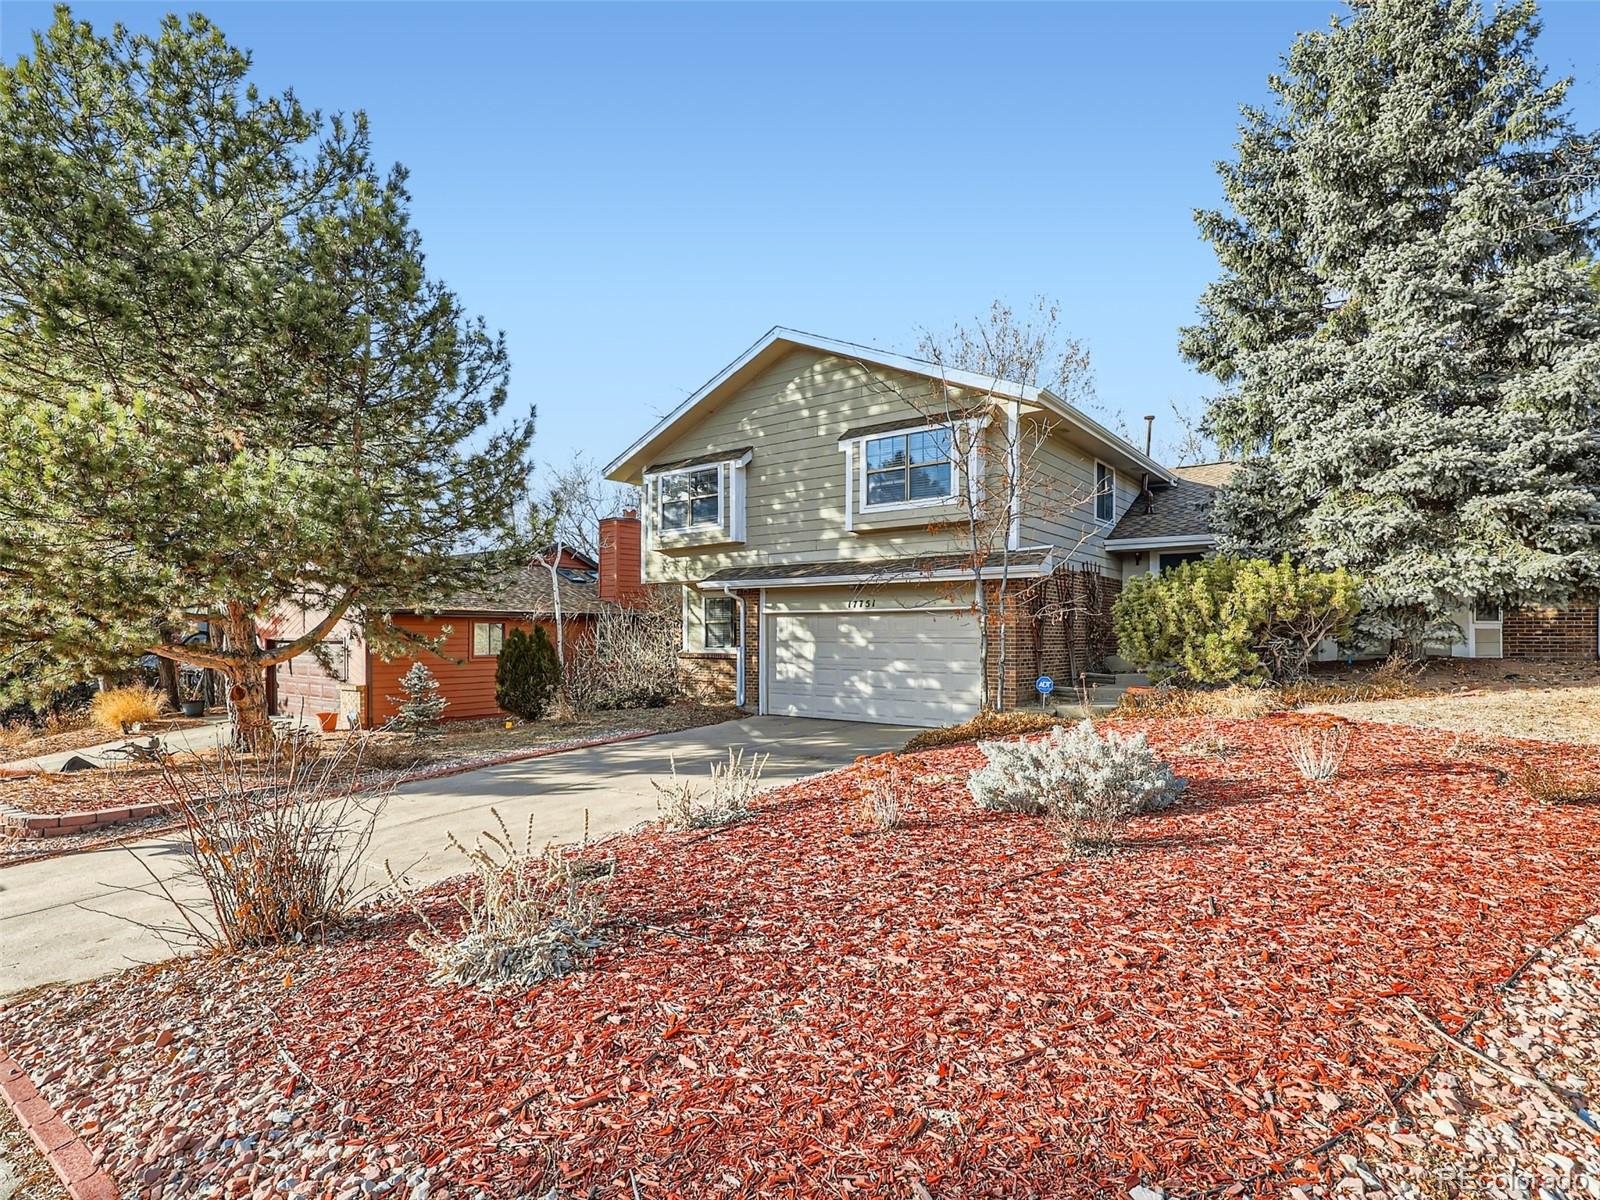 17751 e berry place, Centennial sold home. Closed on 2024-04-12 for $530,000.